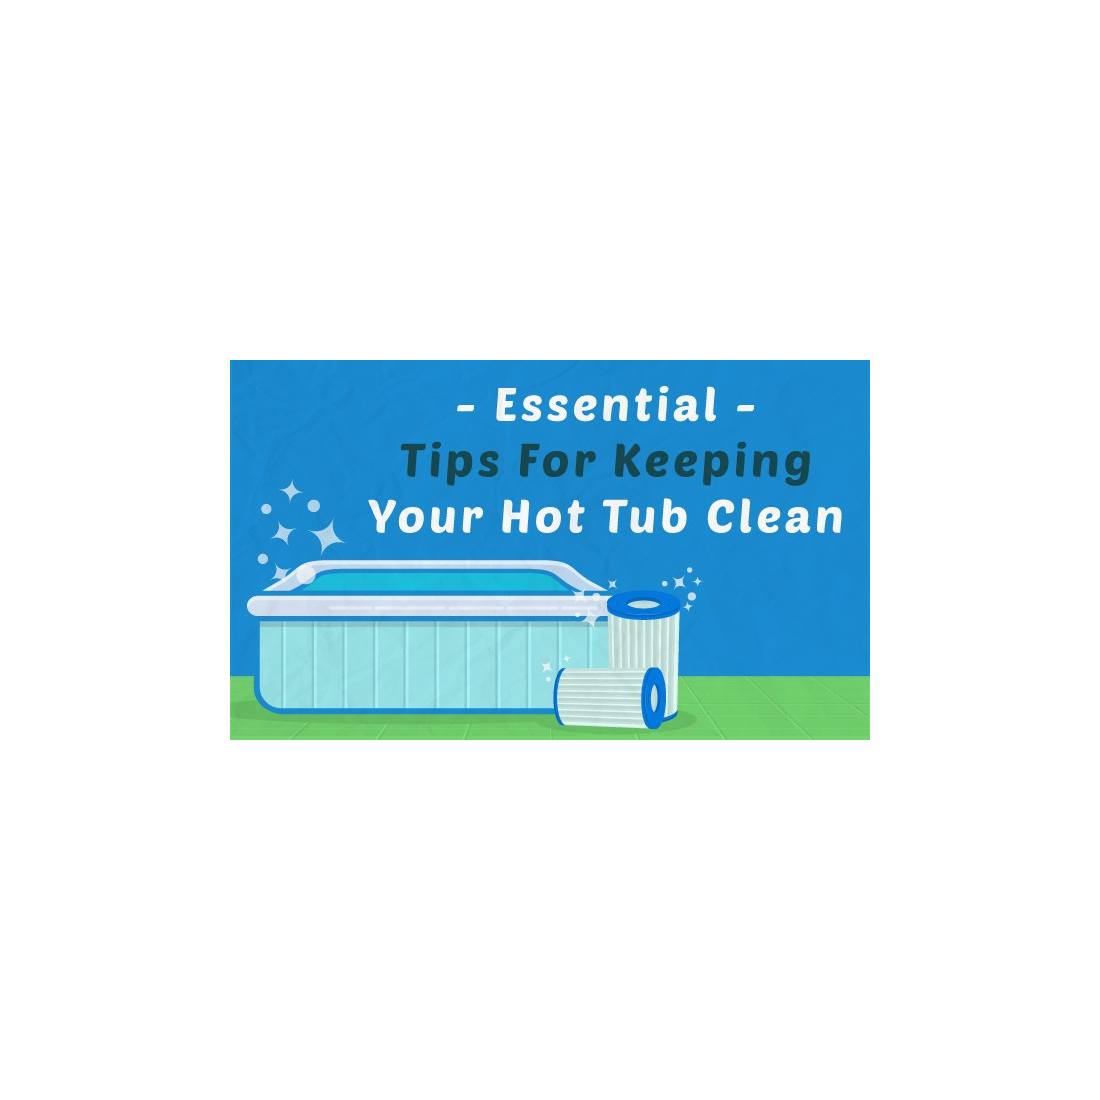 3 Essential Tips for Keeping Your Hot Tub Clean